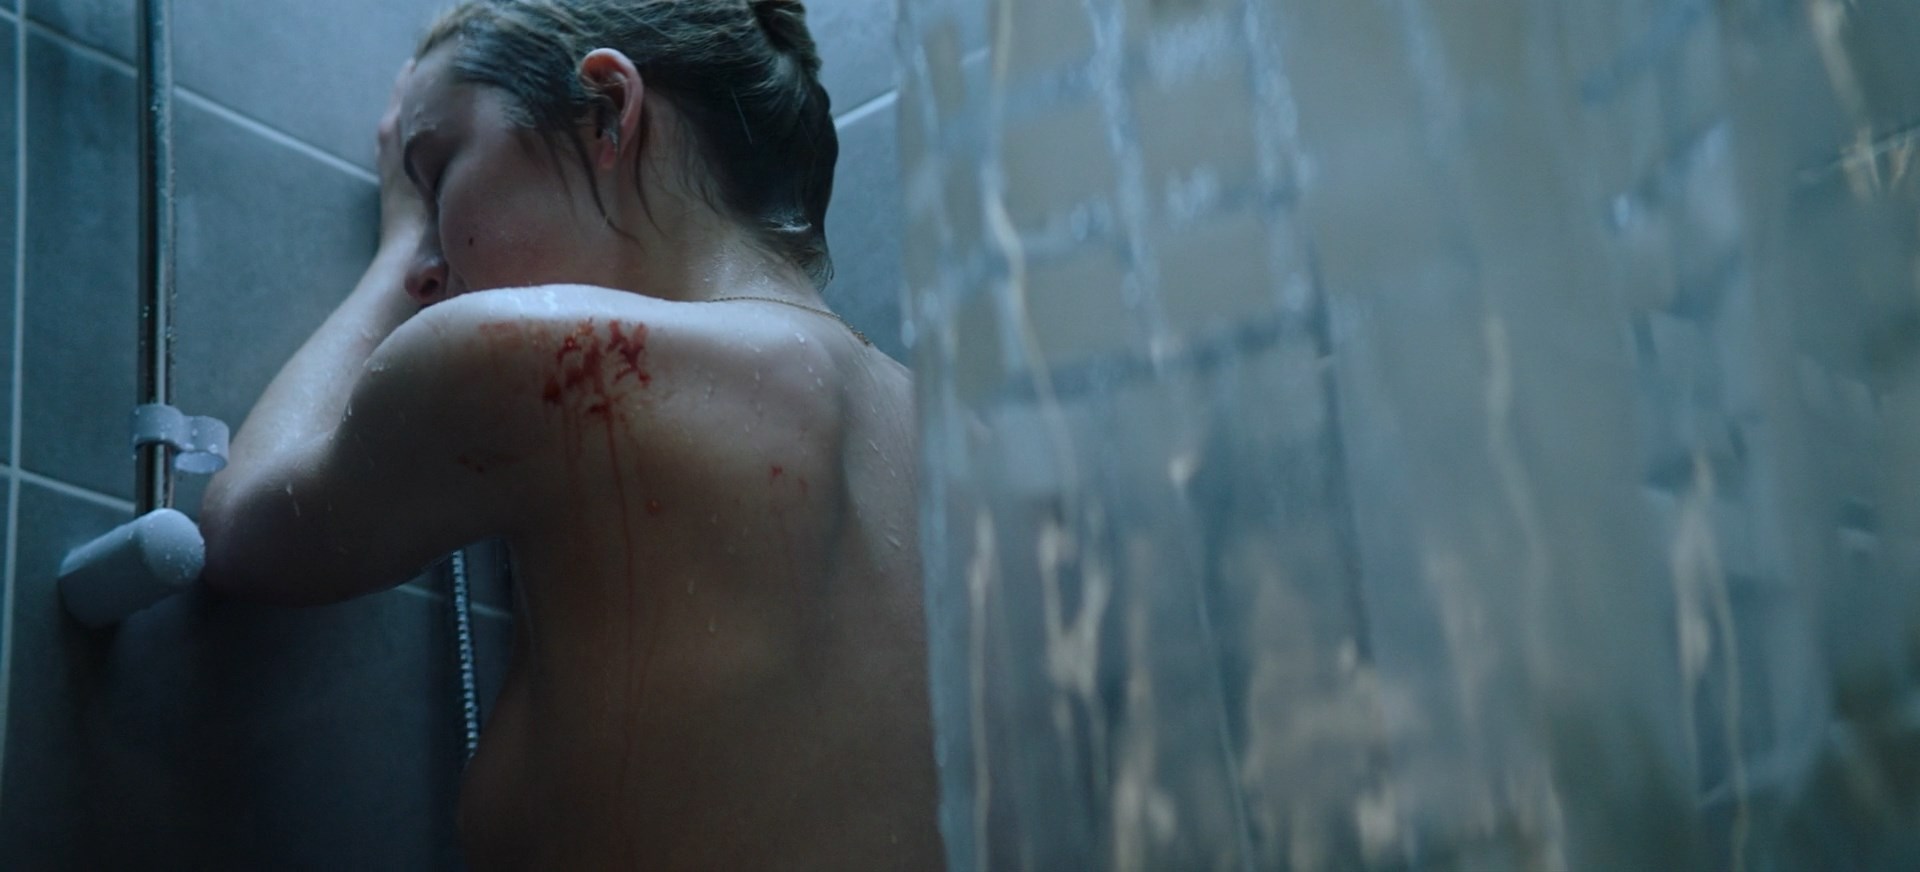 Sarah Bolger shows sideboob when she is taking a shower.